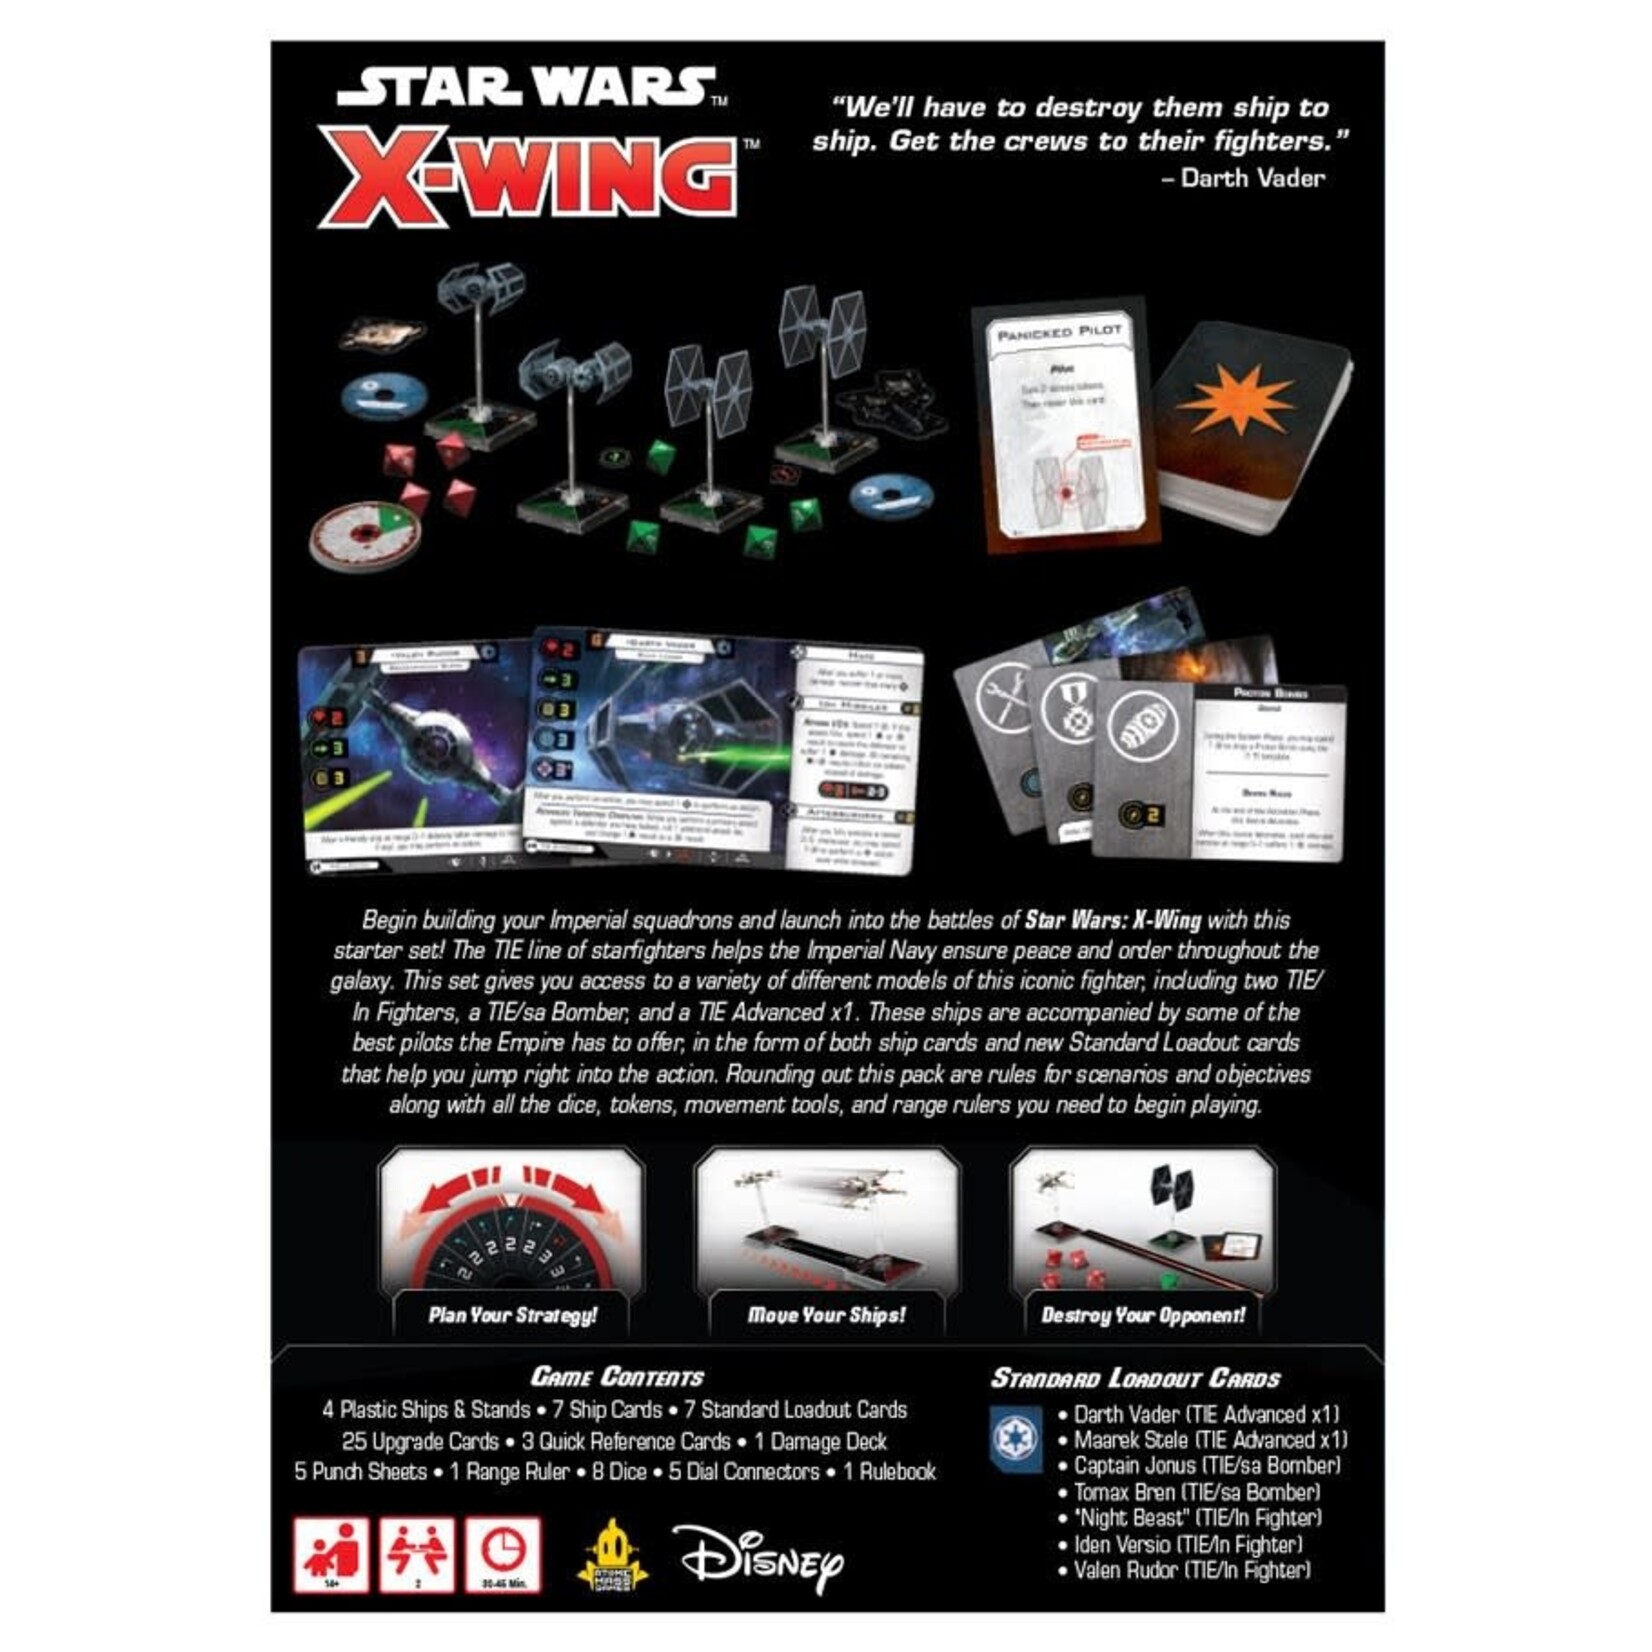 Atomic Mass Games X-Wing: Galactic Empire Squadron Starter Pack